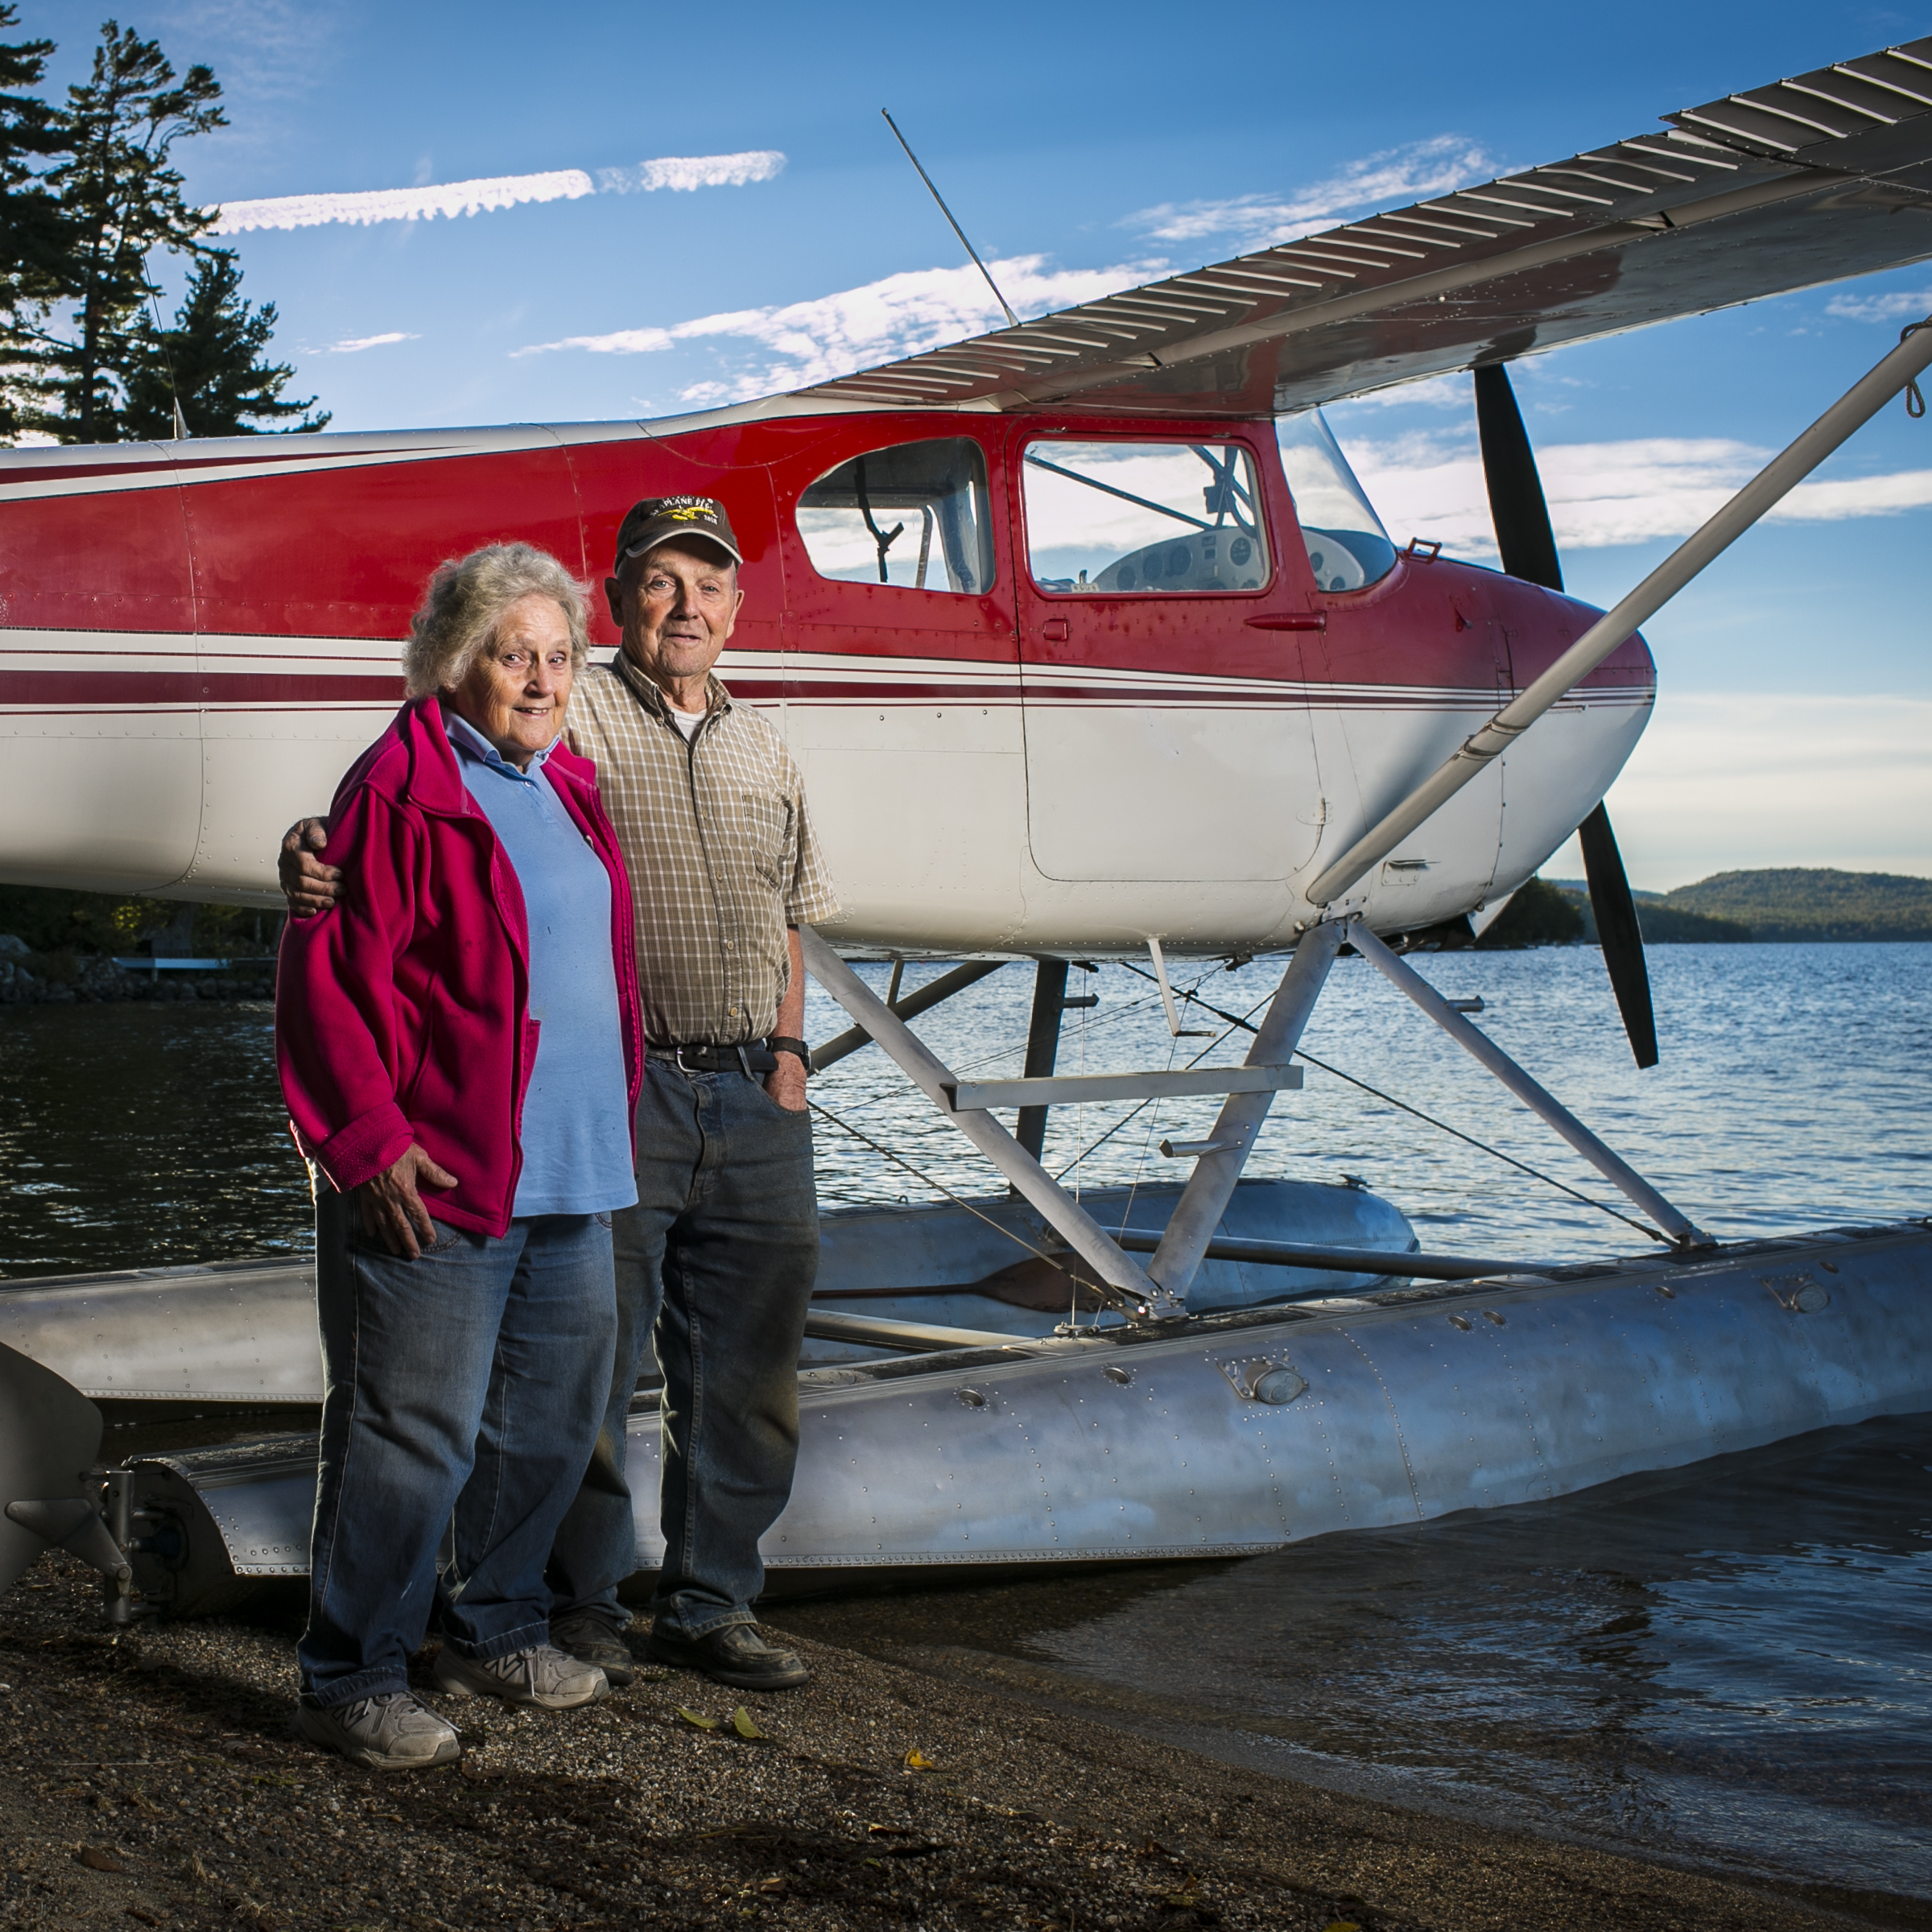  George Dunn and his wife Donna have been together 63 years and living on the pond for more than 45 of those years. George Dunn, 85, has had a lifelong passion for flying. He first got his license in 1952 and now shares that passion with seven other 